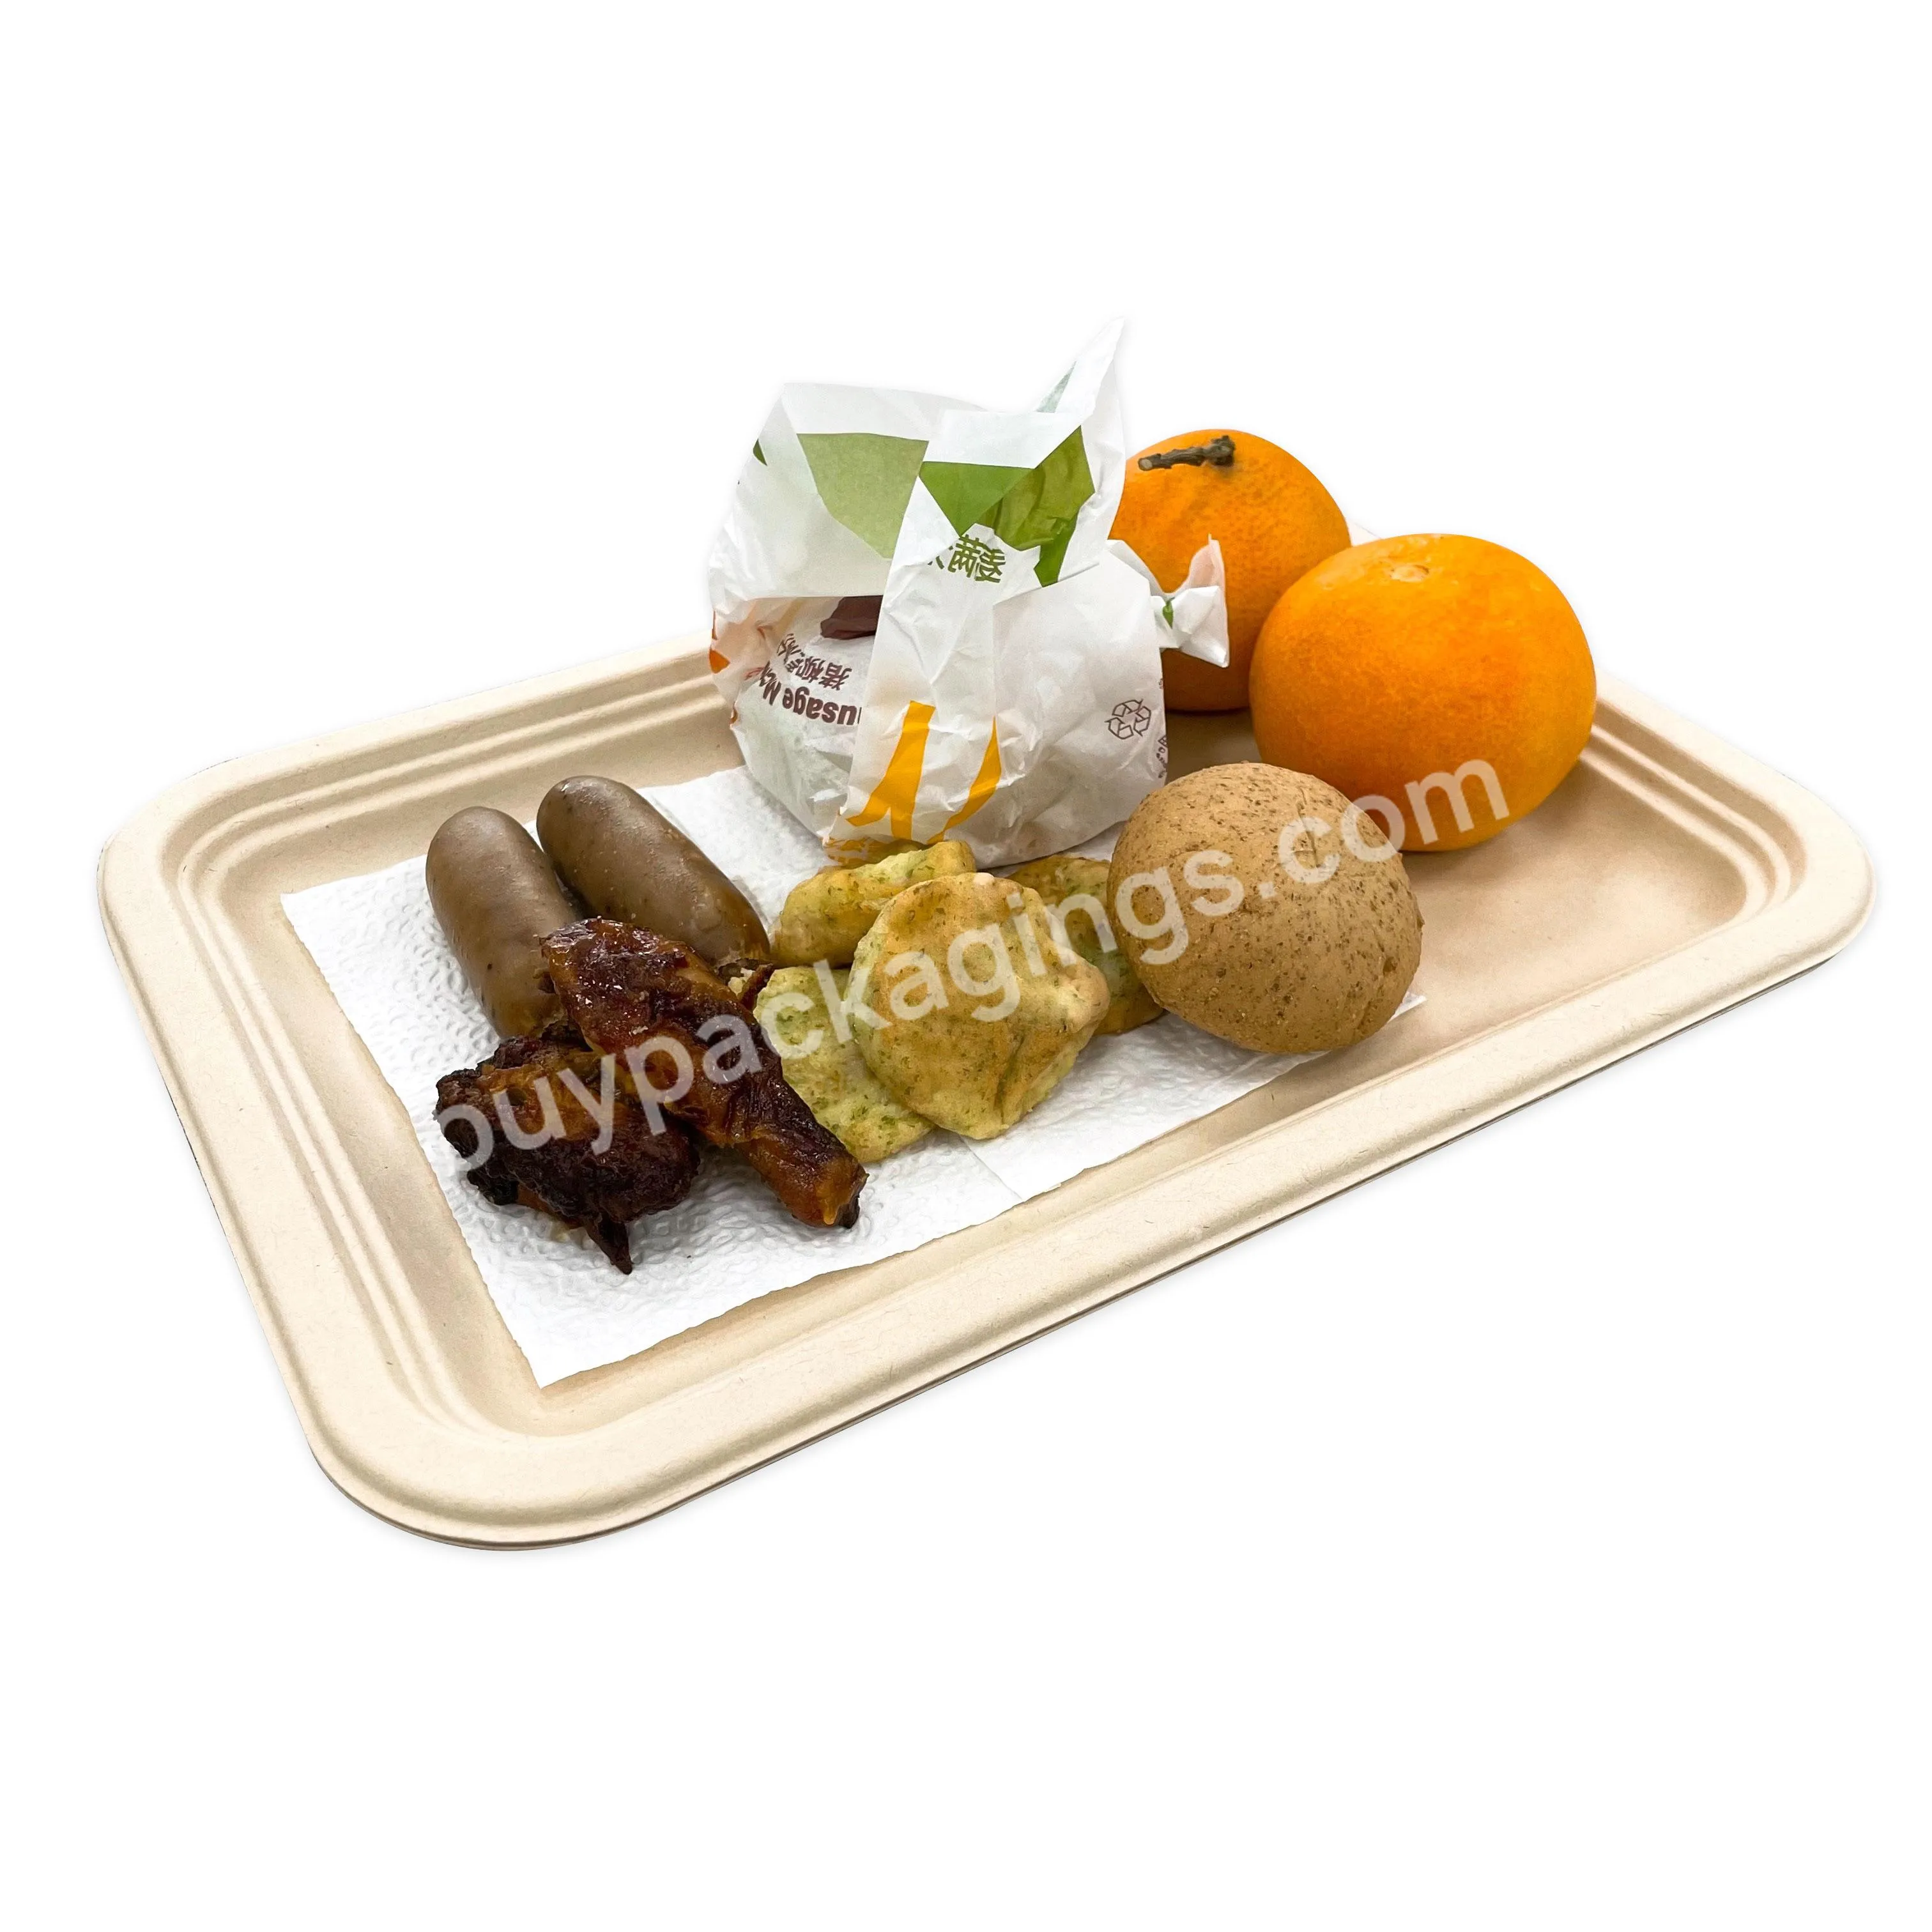 Disposable Sugarcane Modern White Frozen Meat Packaging Serving Trays Rectangle Paper Dinner Plates - Buy White Rectangle Plate,Rectangle Paper Plate,Disposable Sugarcane Rectangle Plate.